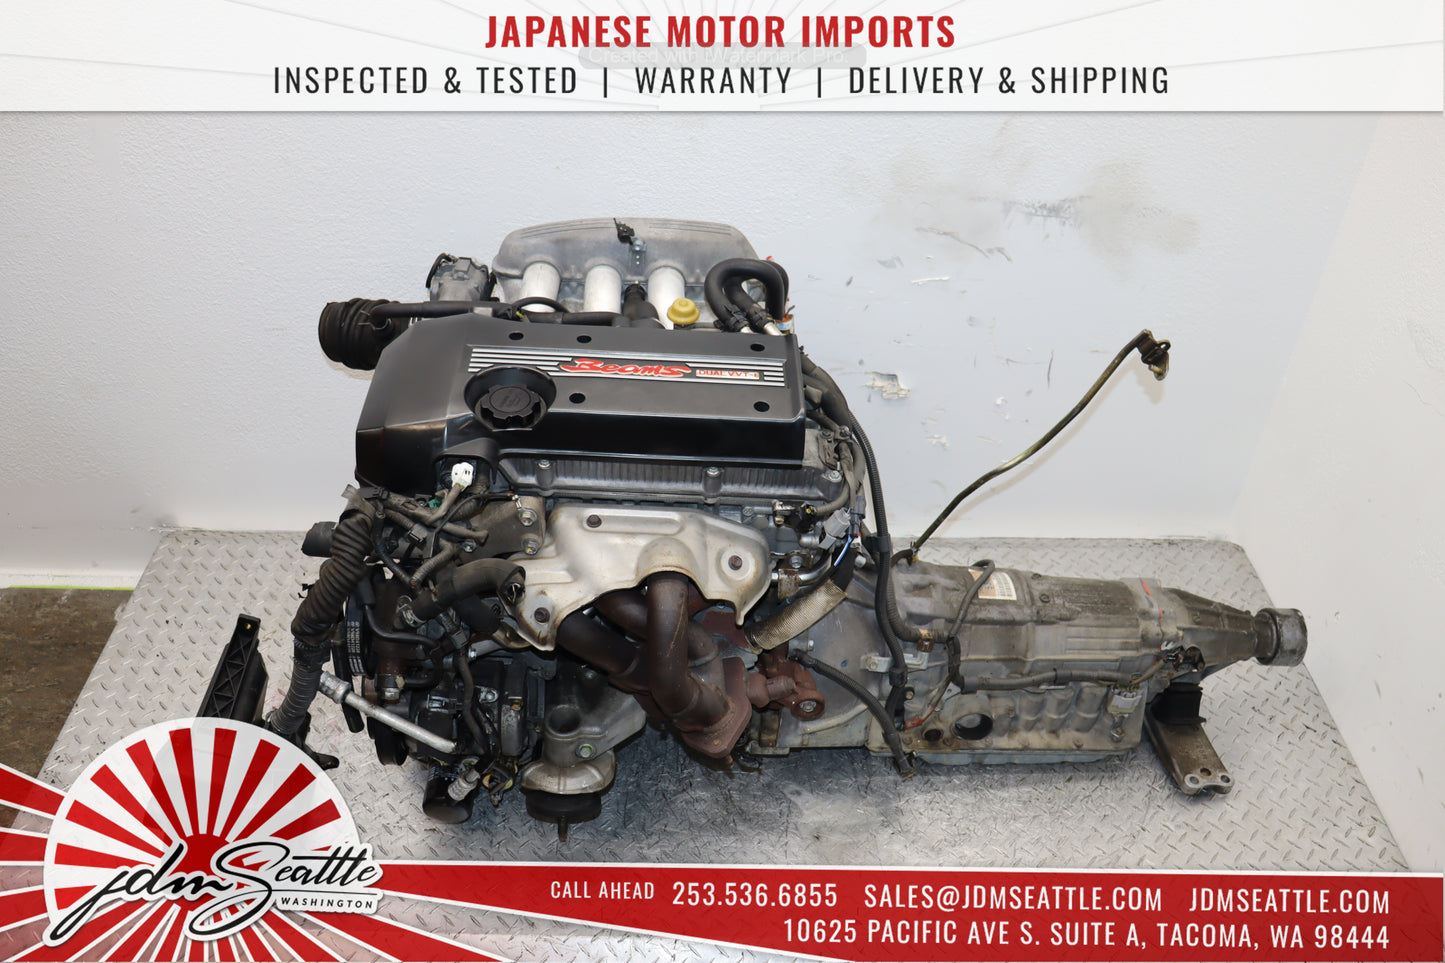 JDM 3SGE BEAMS TOYOTA  ALTEZZA IS300  VVTI ENGINE WITH AUTOMATIC TRANSMISSION